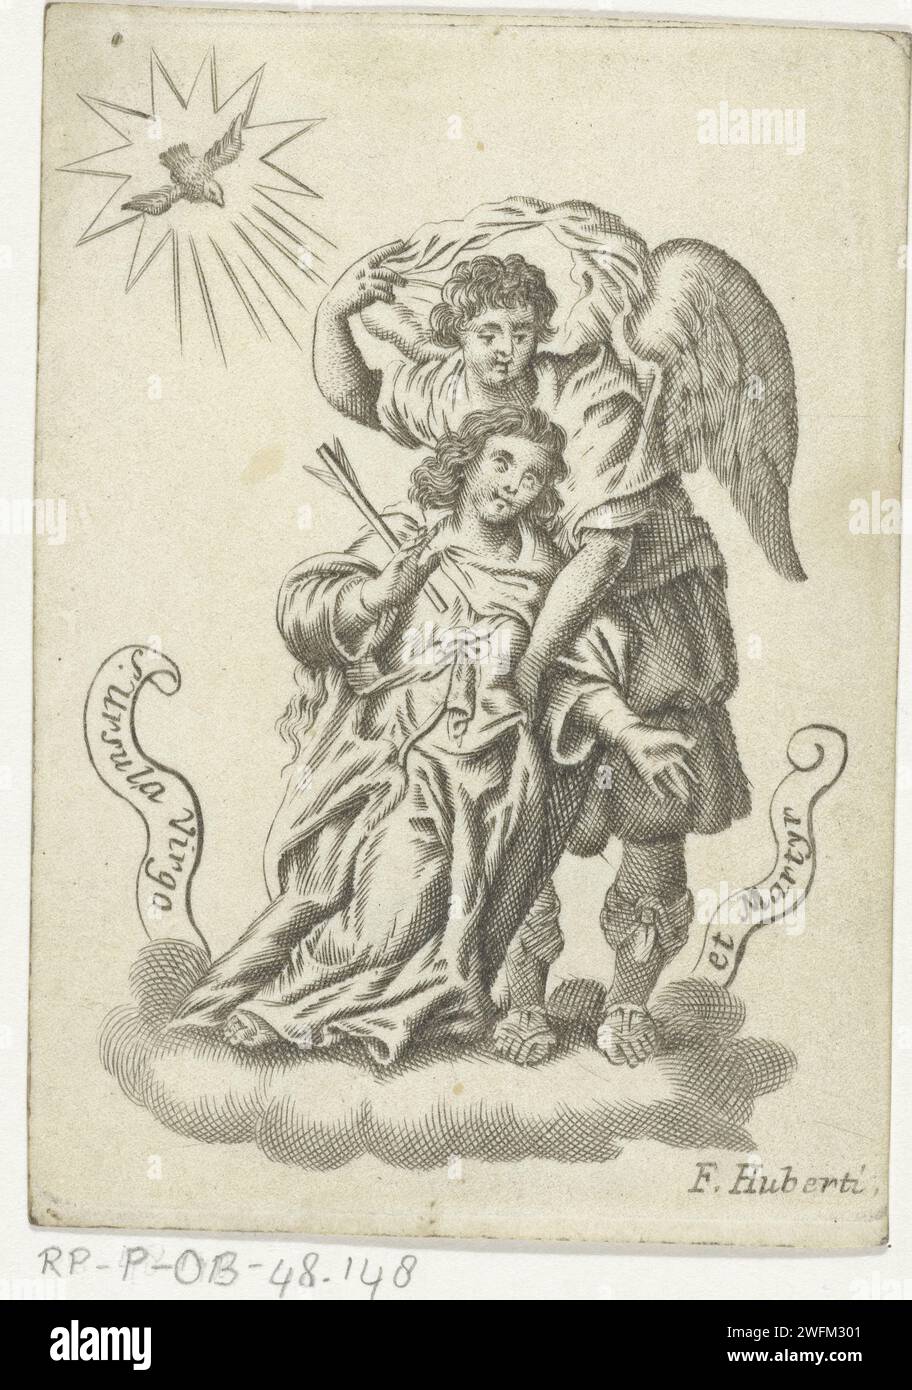 H. Ursula, Franz Huybrechts, 1656 - 1661 print Saint Ursula with an arrow in her chest is held by an angel as a martyr. In the upper left corner, the Holy Spirit is symbolized by the pigeon. Antwerp parchment (animal material) engraving the virgin martyr Ursula of Cologne; possible attributes: arrow, banner with red cross, cloak of ermine, crown, ship - post-mortem occurrences of female saint Stock Photo